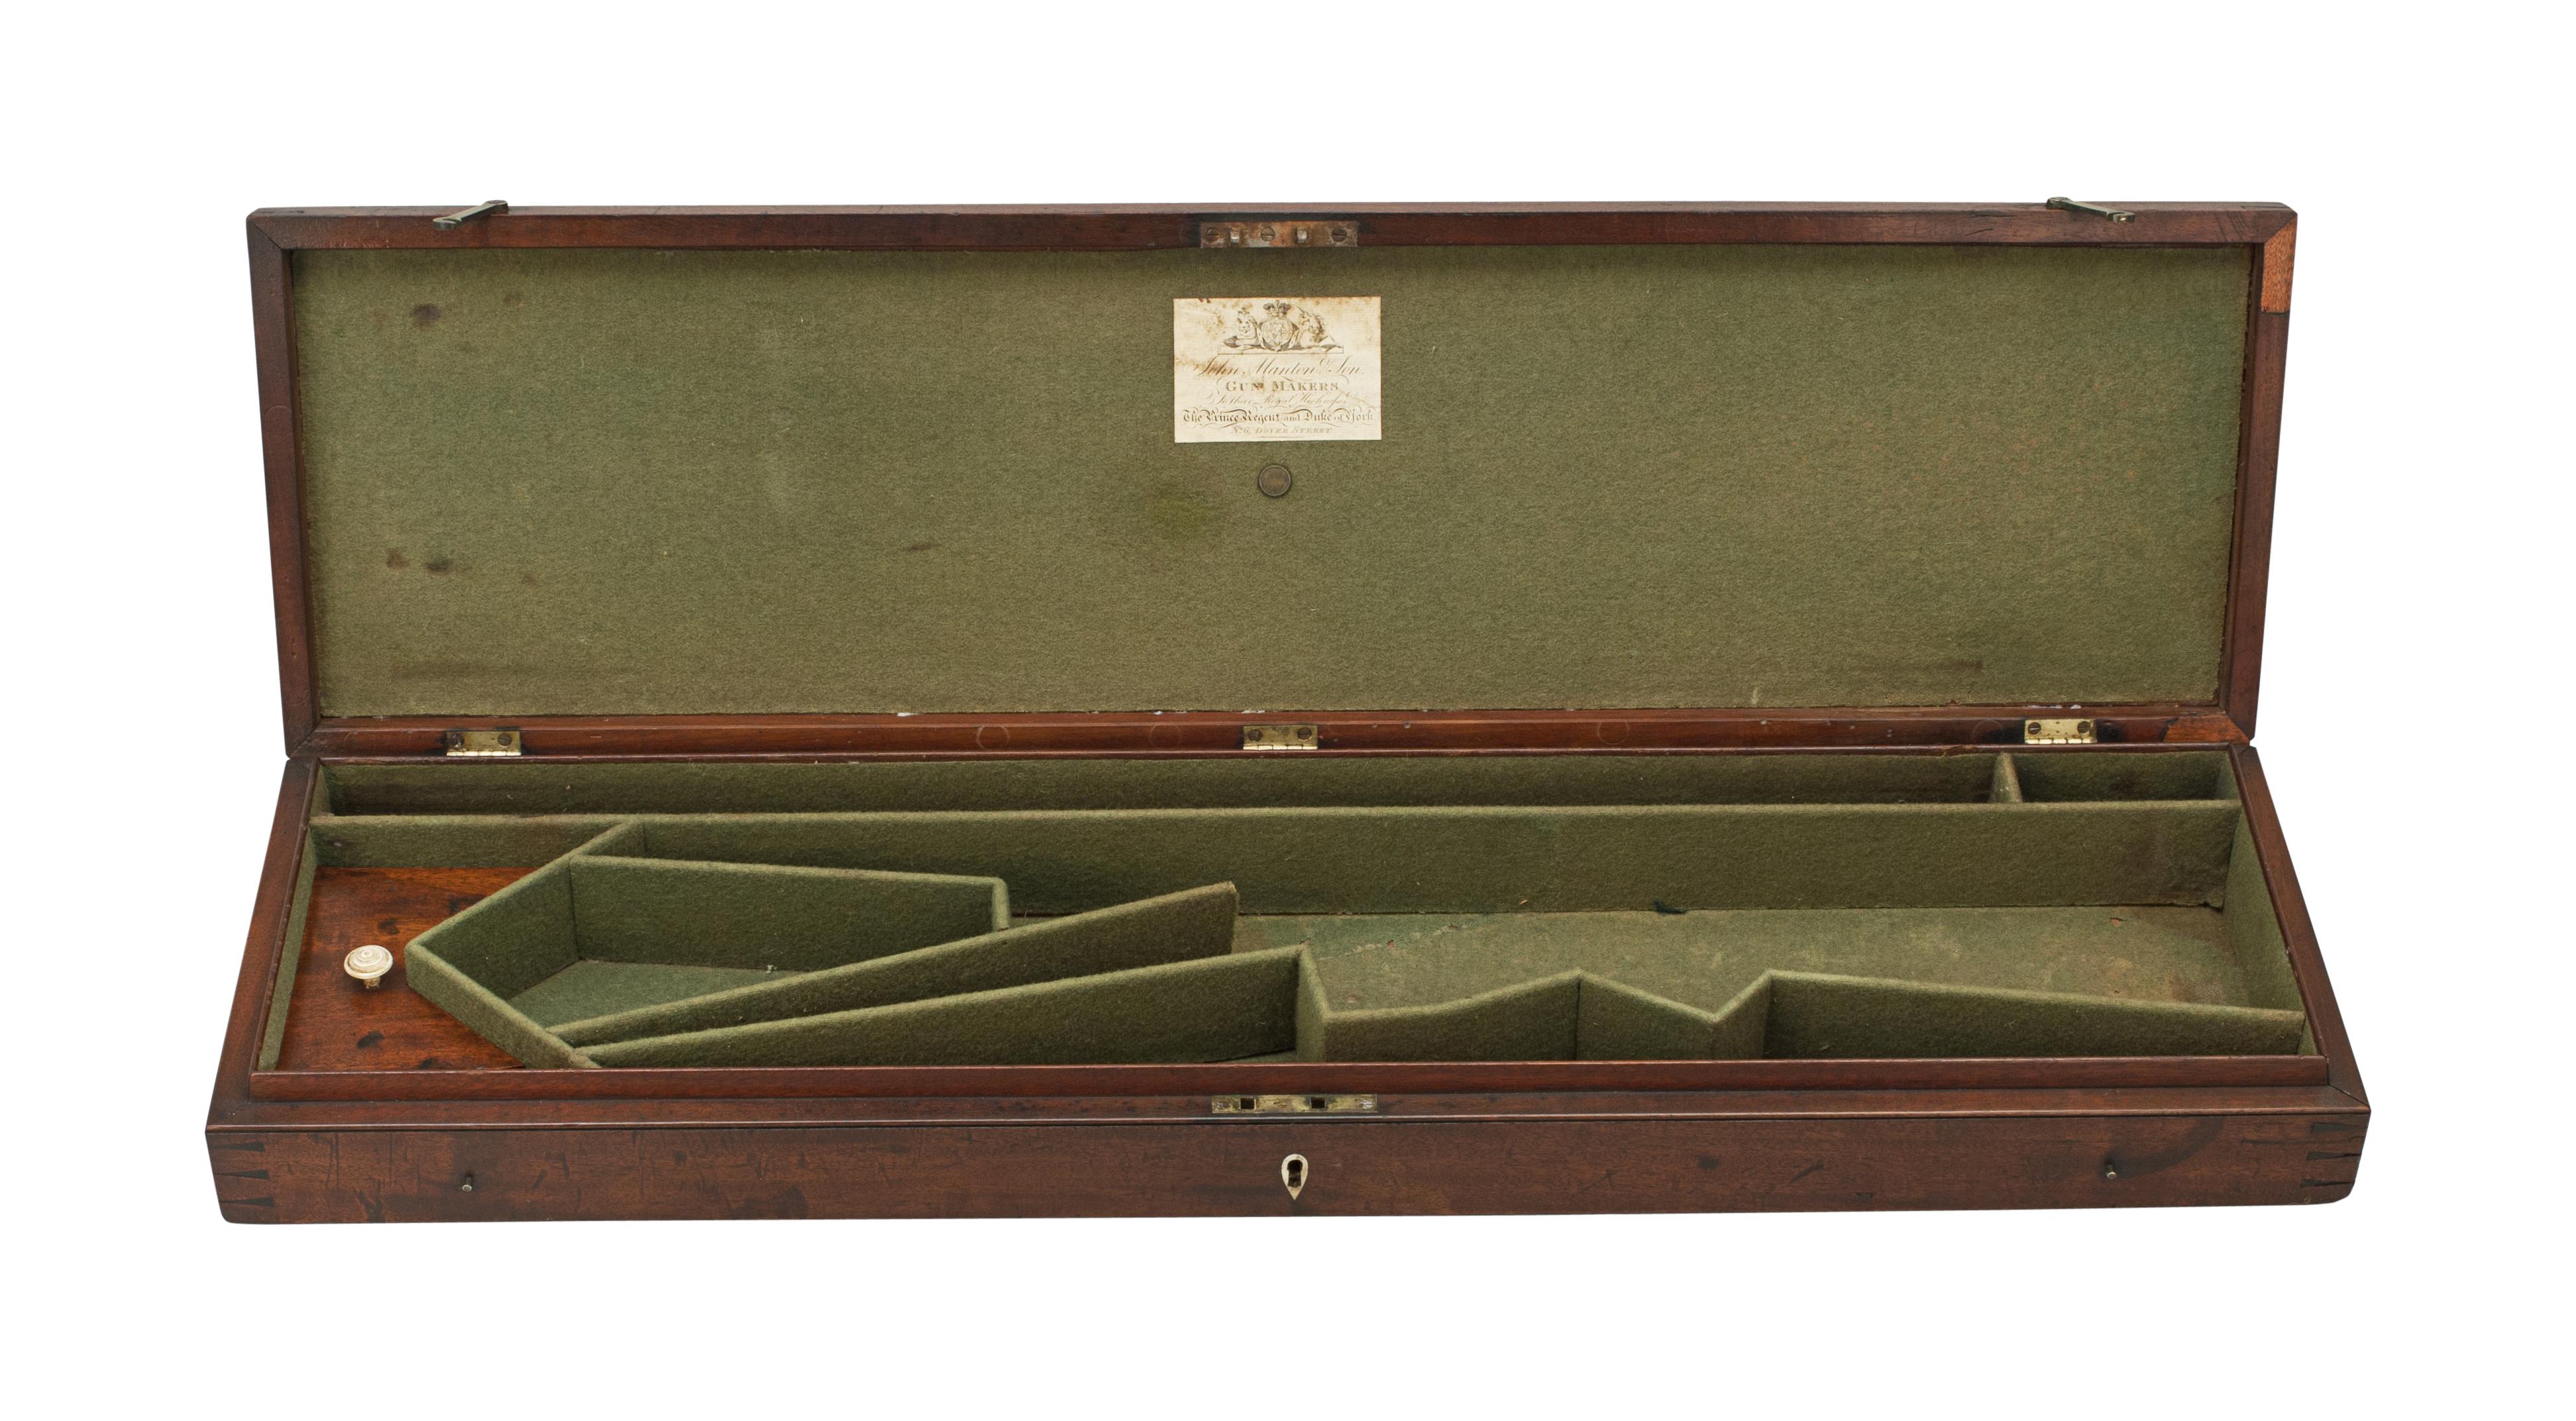 John Manton mahogany sporting gun case.
A mahogany gun case by John Manton & Son, No.6 Dover Street, London, the green baize lined case with dividers and fitted for a double barrel shotgun. The inside of the lid with paper trade label for John